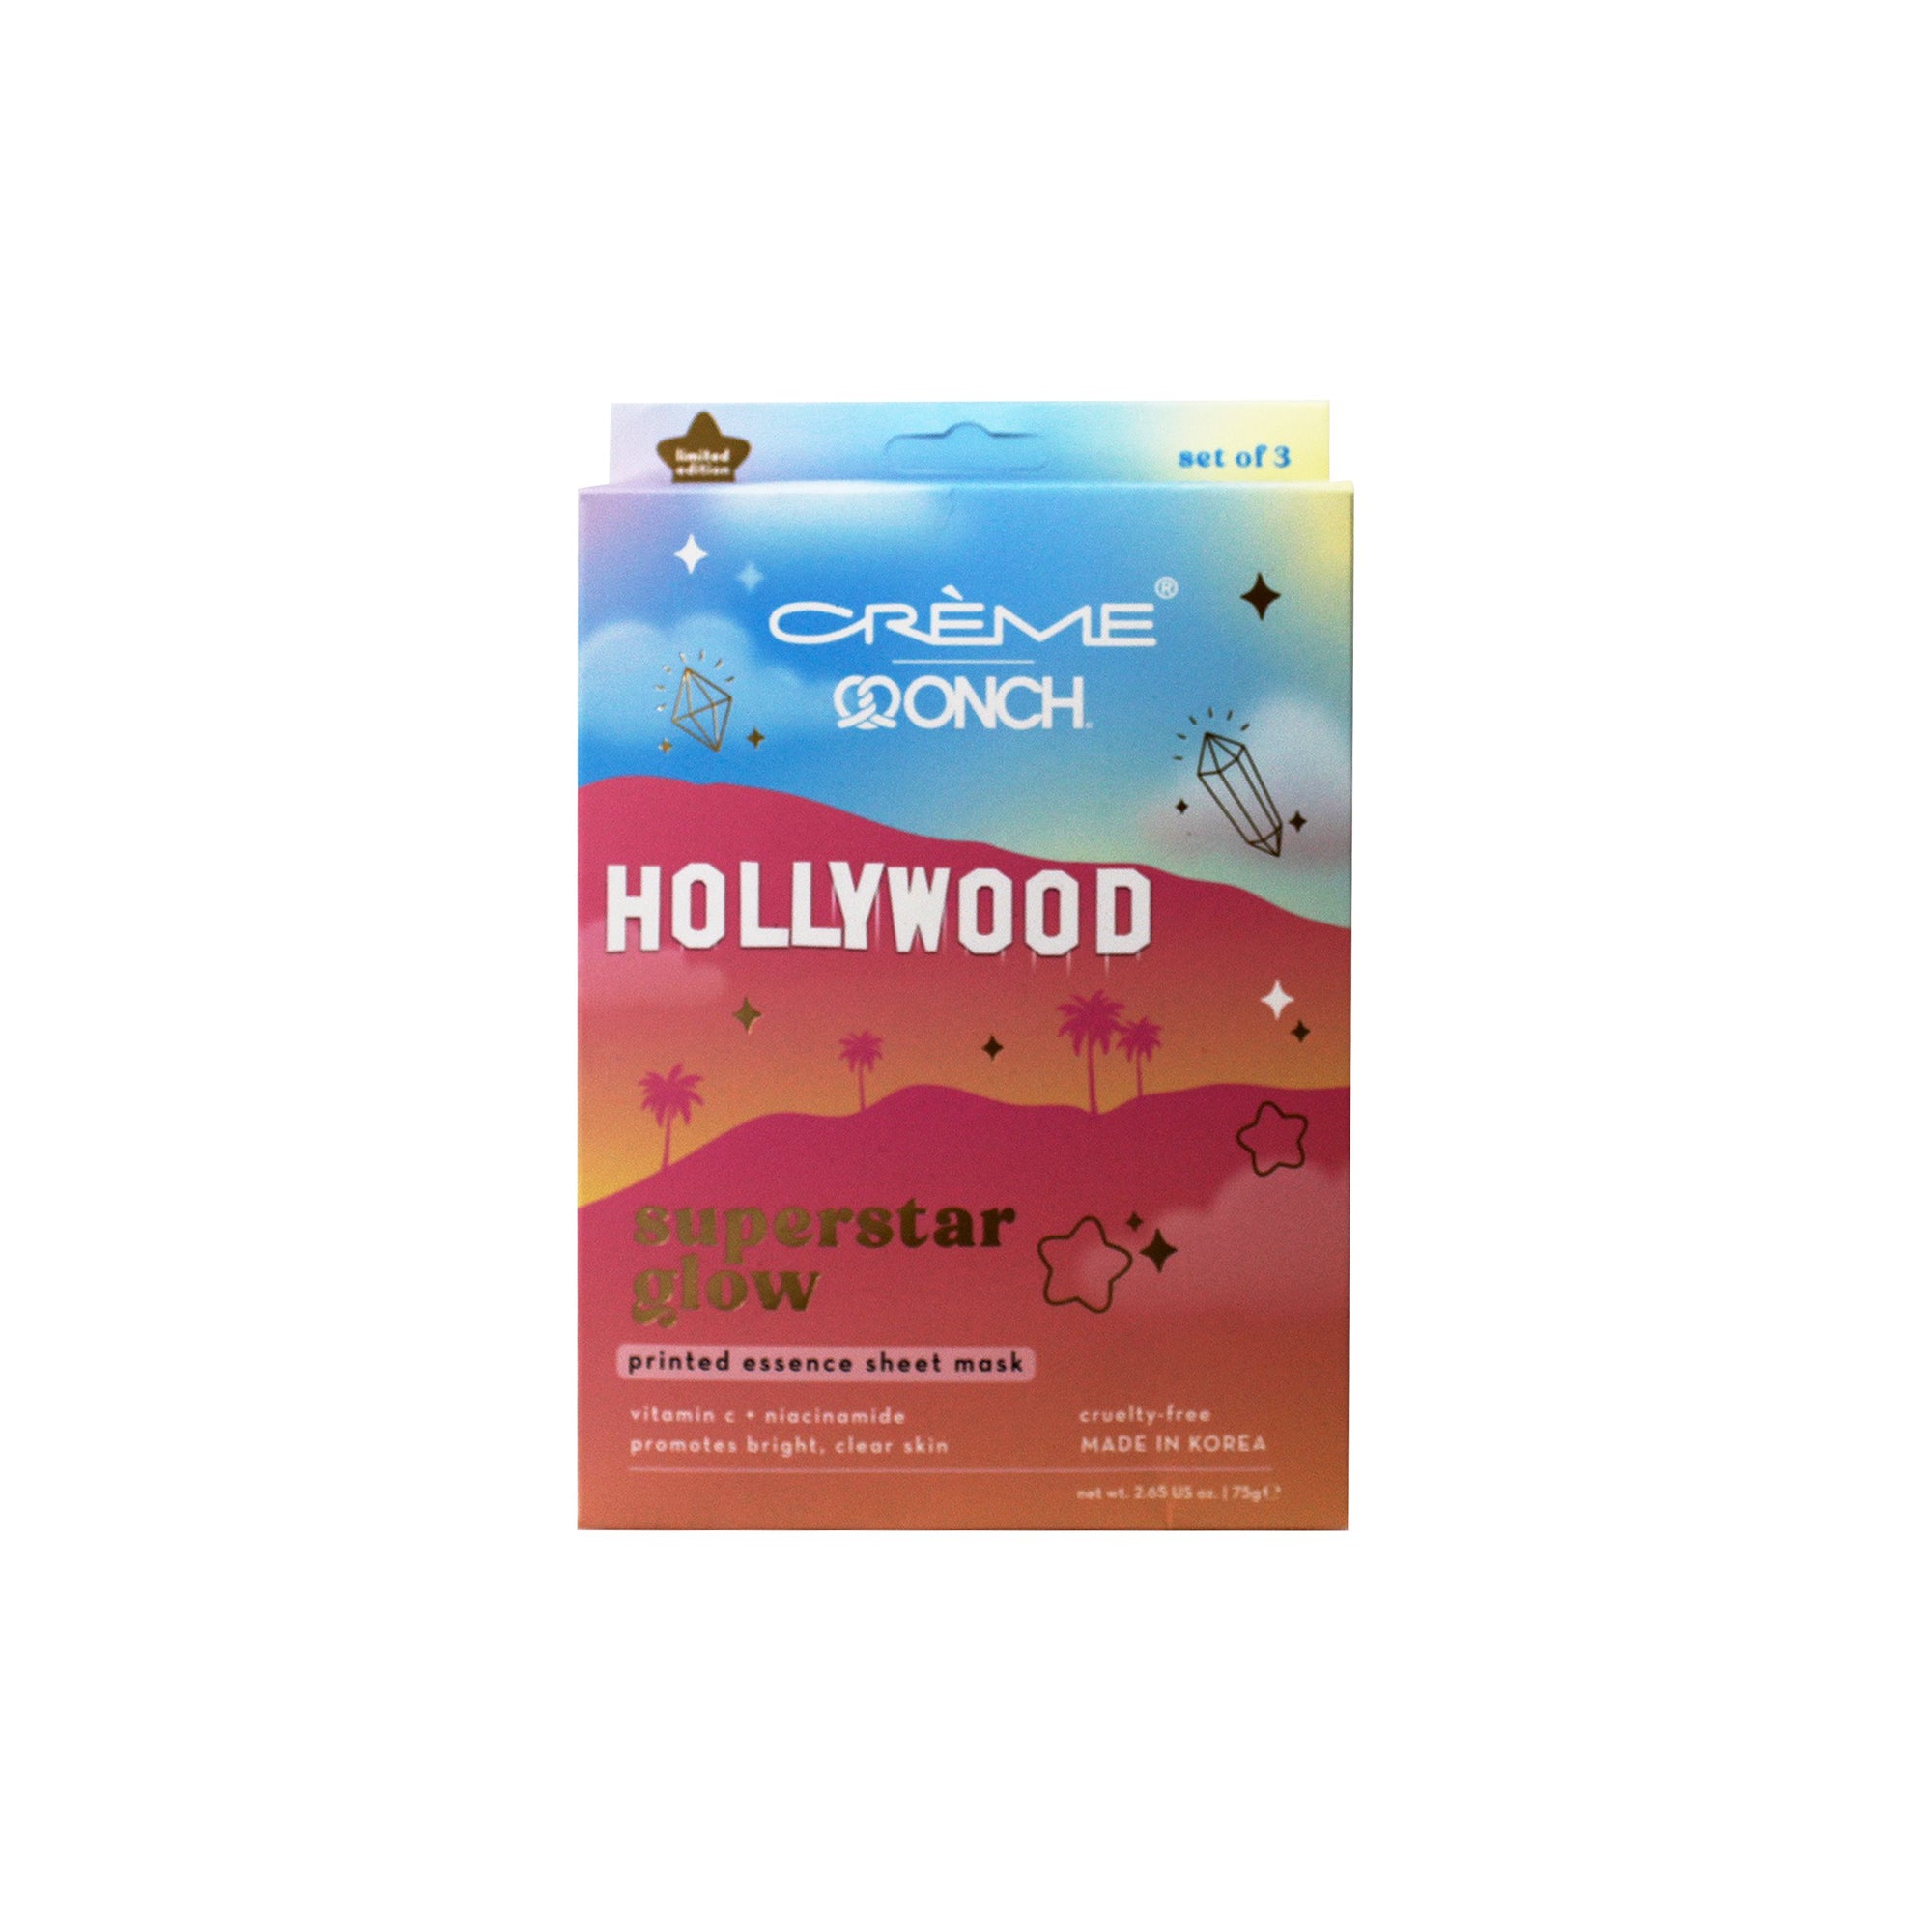 The Crème Shop x Onch® x Hollywood® Superstar Glow Printed Essence Sheet Mask Sheet masks The Crème Shop x Onch® x Hollywood® 